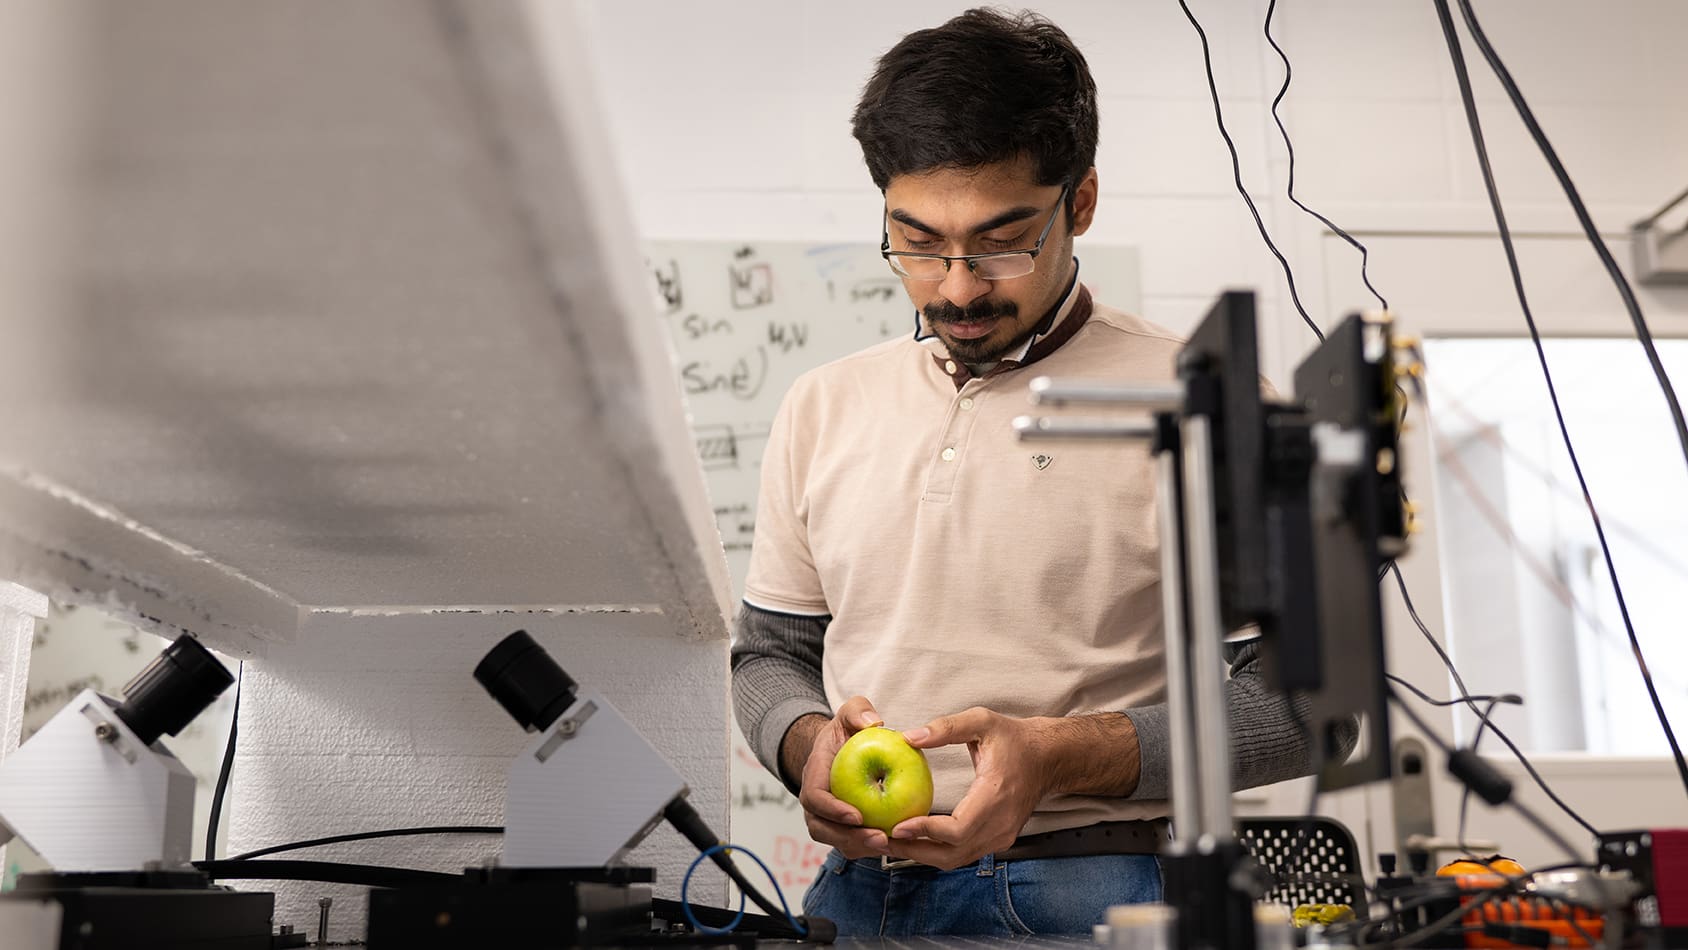 Researcher examines a green apple in the lab.